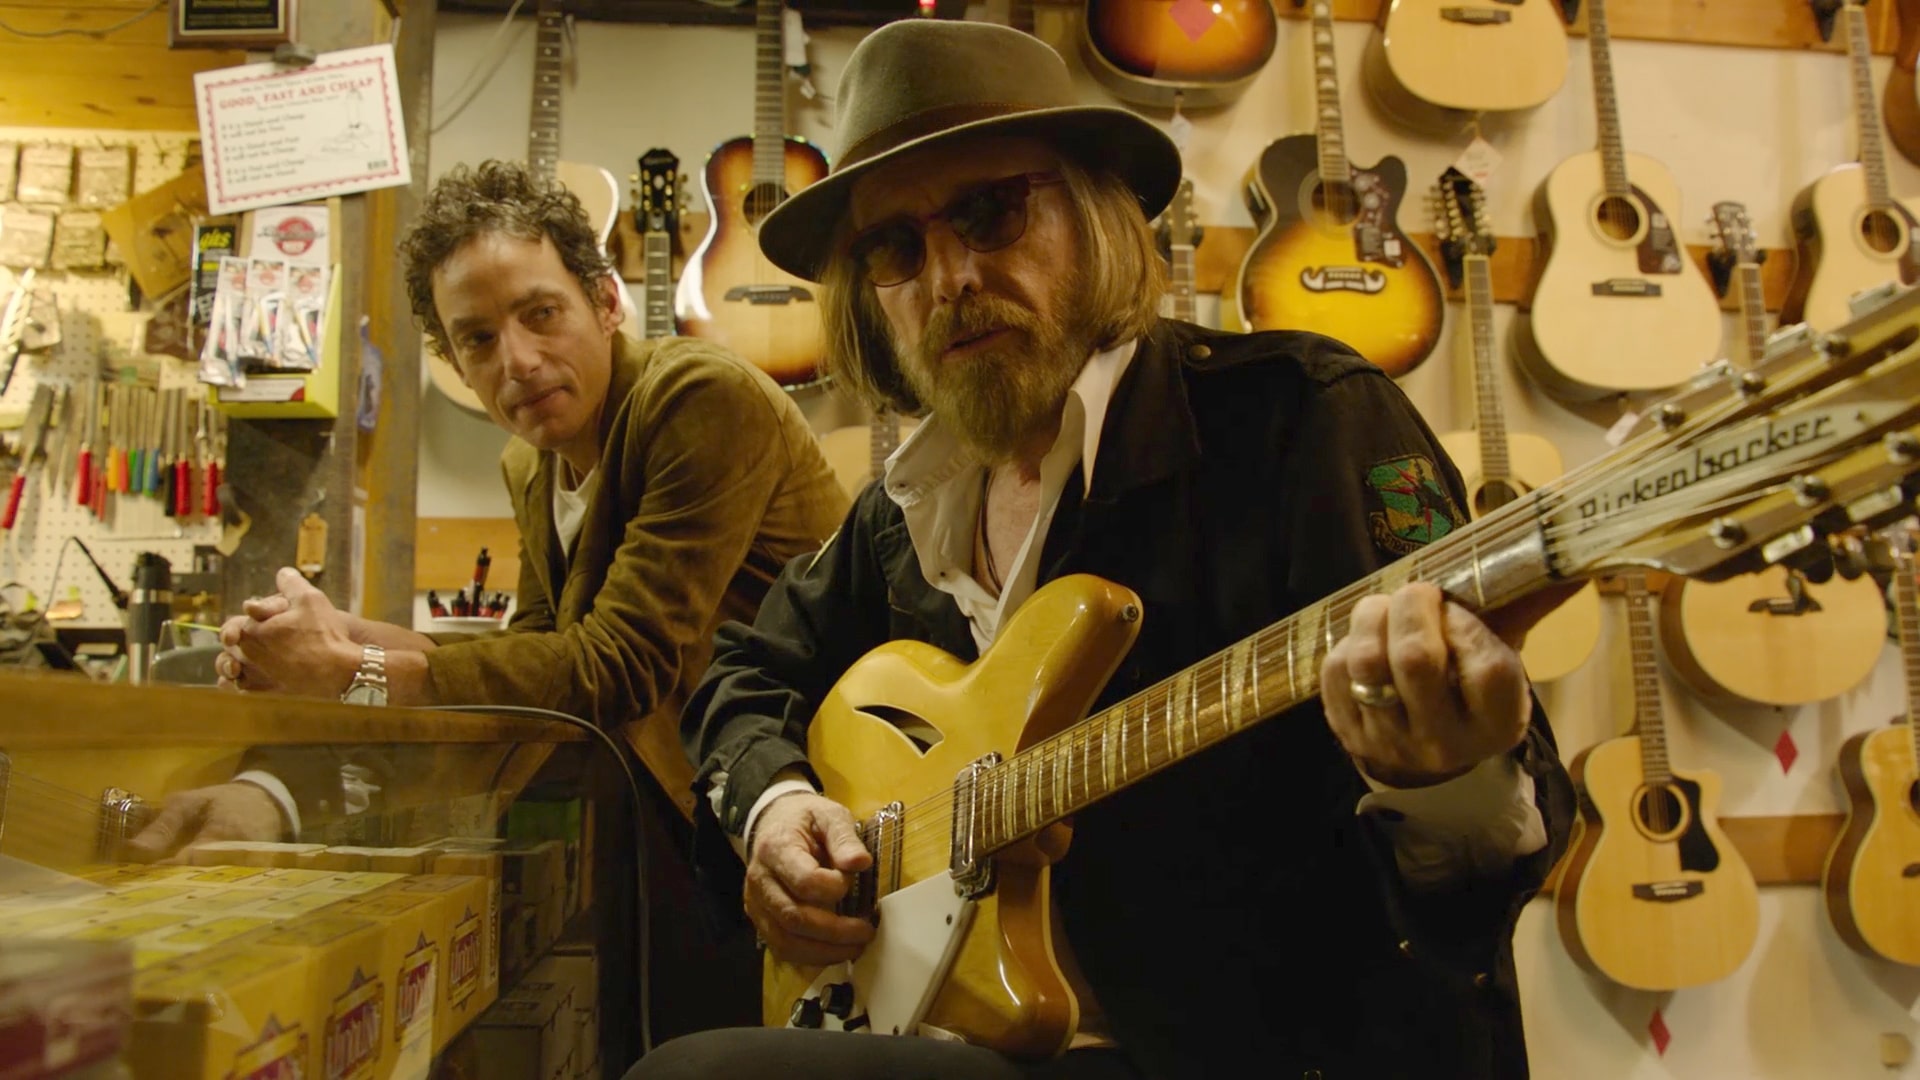 ECHO IN THE CANYON, Jakob Dylan, Tom Petty, 2018